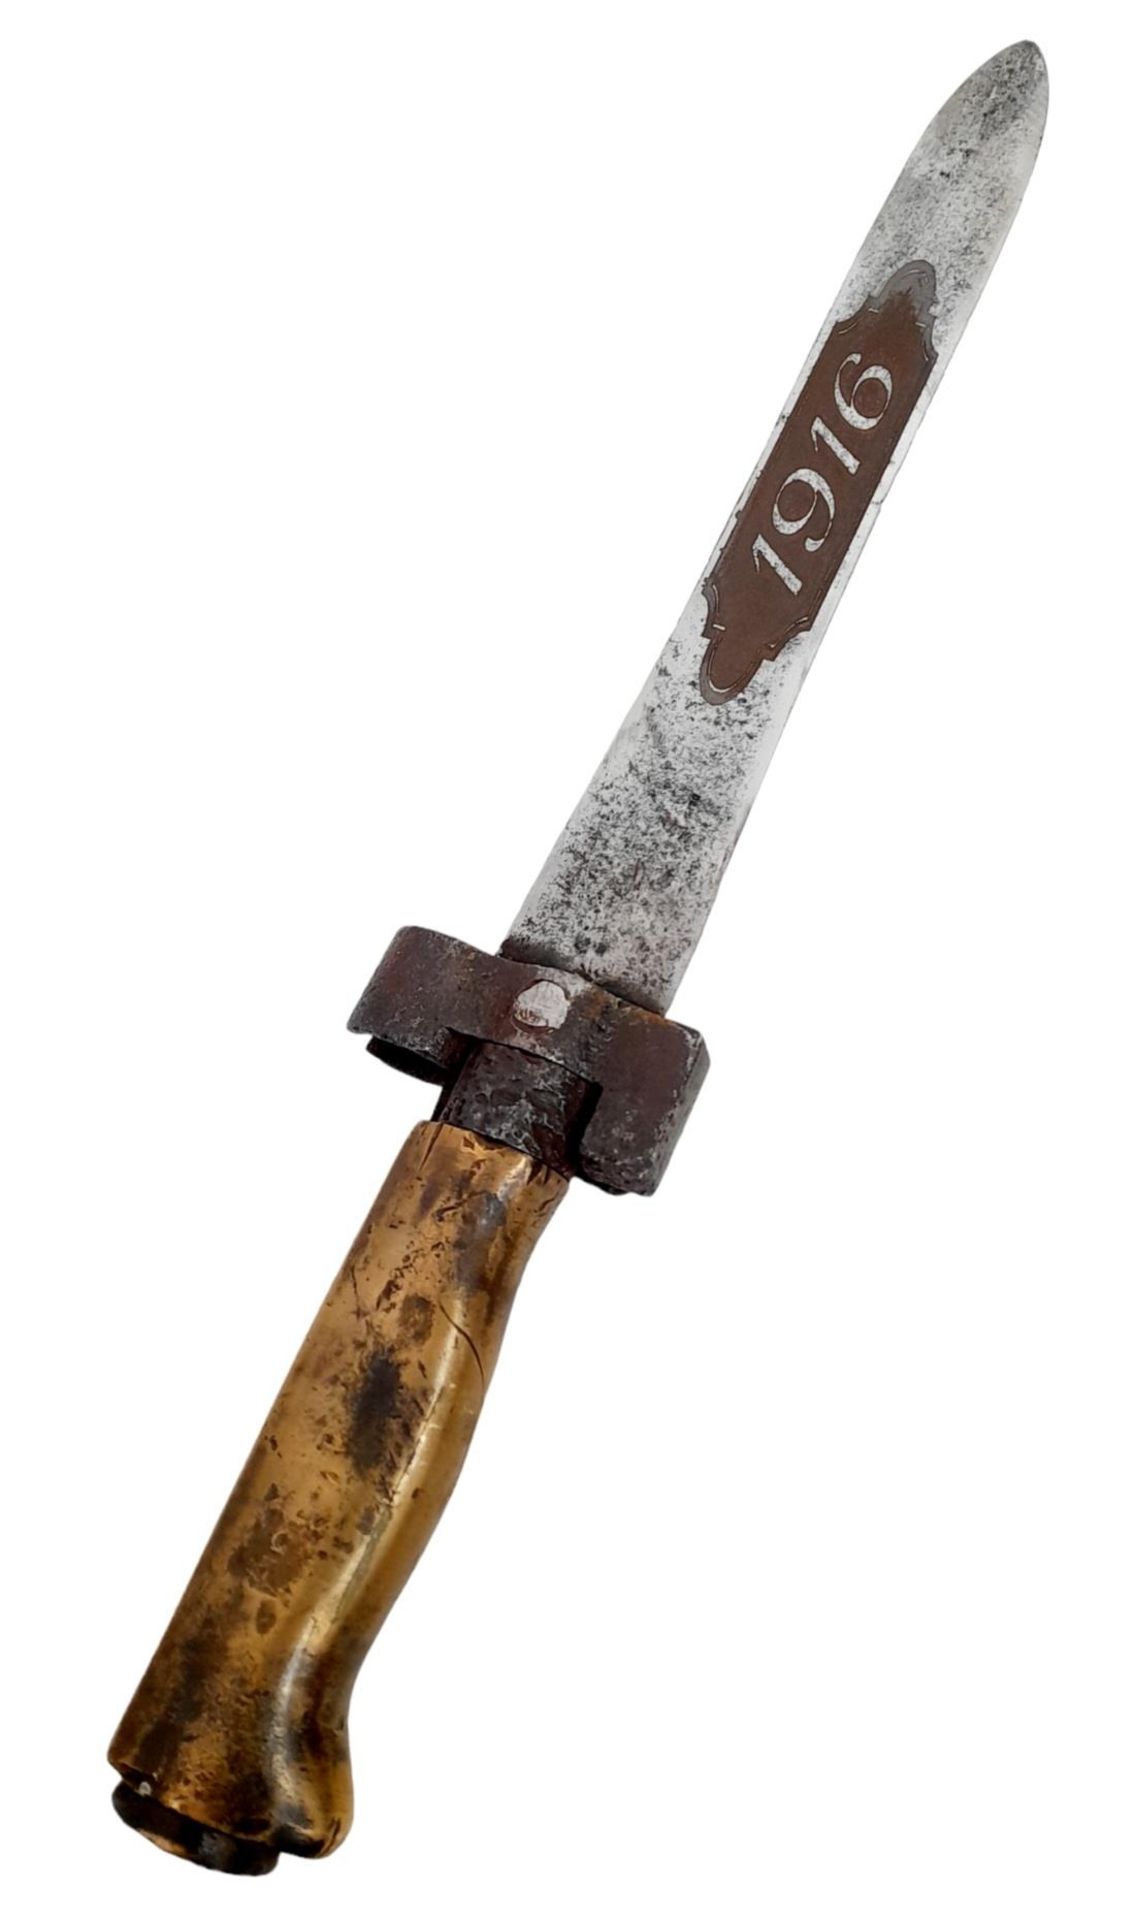 WW1 French Epee Bayonet made into a Trench Fighting Knife. The Blade has been etched “ Verdun” on